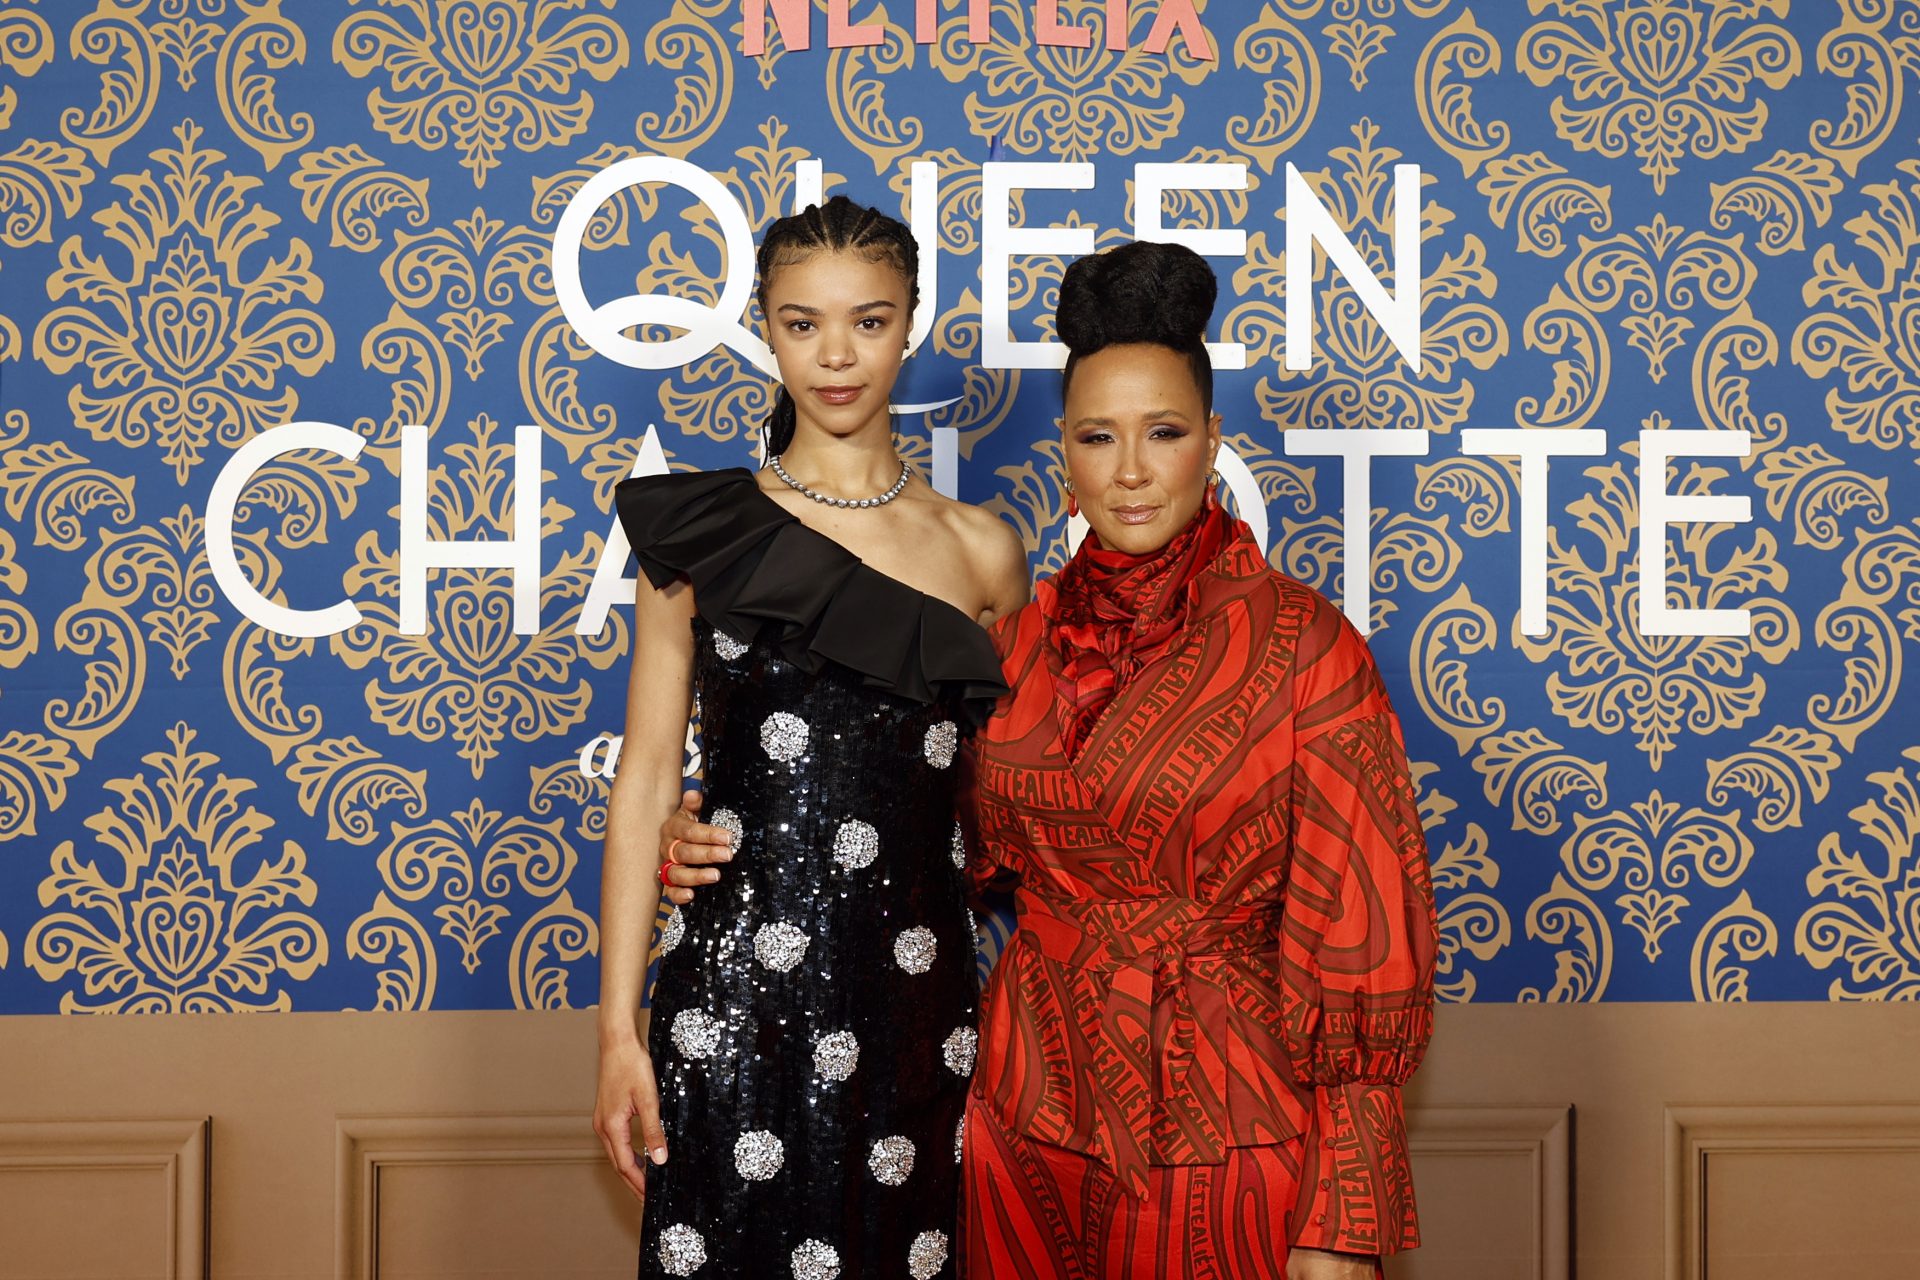 <p>In the Bridgerton spin-off, Queen Charlotte's marriage to King George III opens the door to the black community in the upper ranks of society and creates a movement for racial equality in England. Screenwriter Shonda Rhimes chose to call on two mixed-race actresses, India Amarteifio and <span>Golda Rosheuvel,</span> to play Queen Charlotte at two periods of her life.</p>